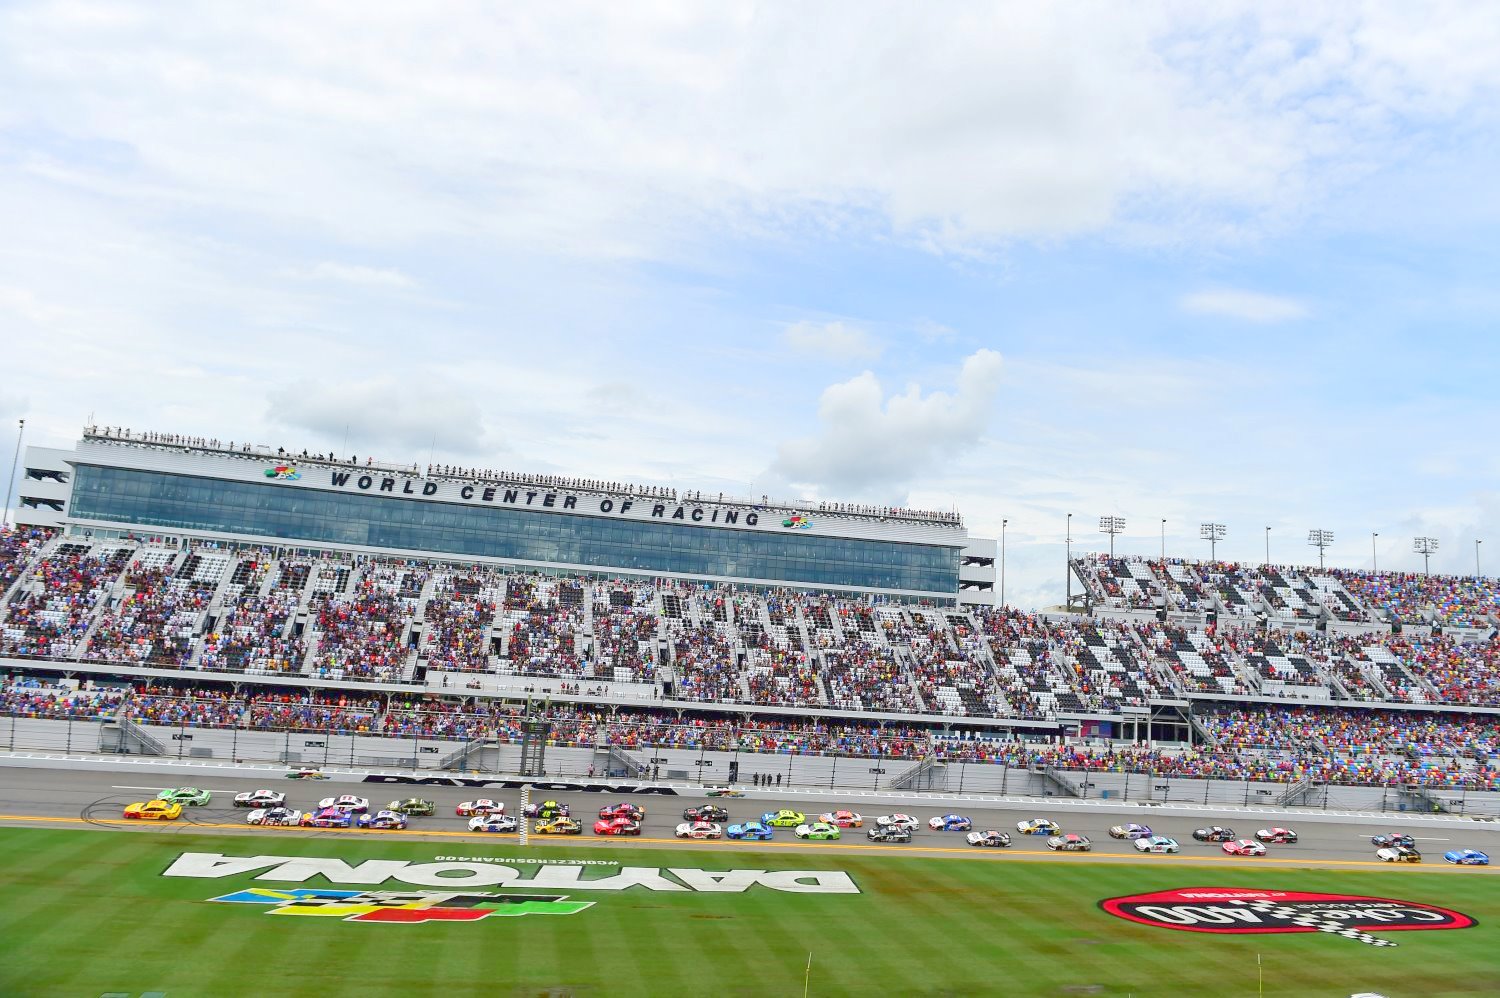 Only an estimated 30,000 were on hand at a track that seats over 100,000 